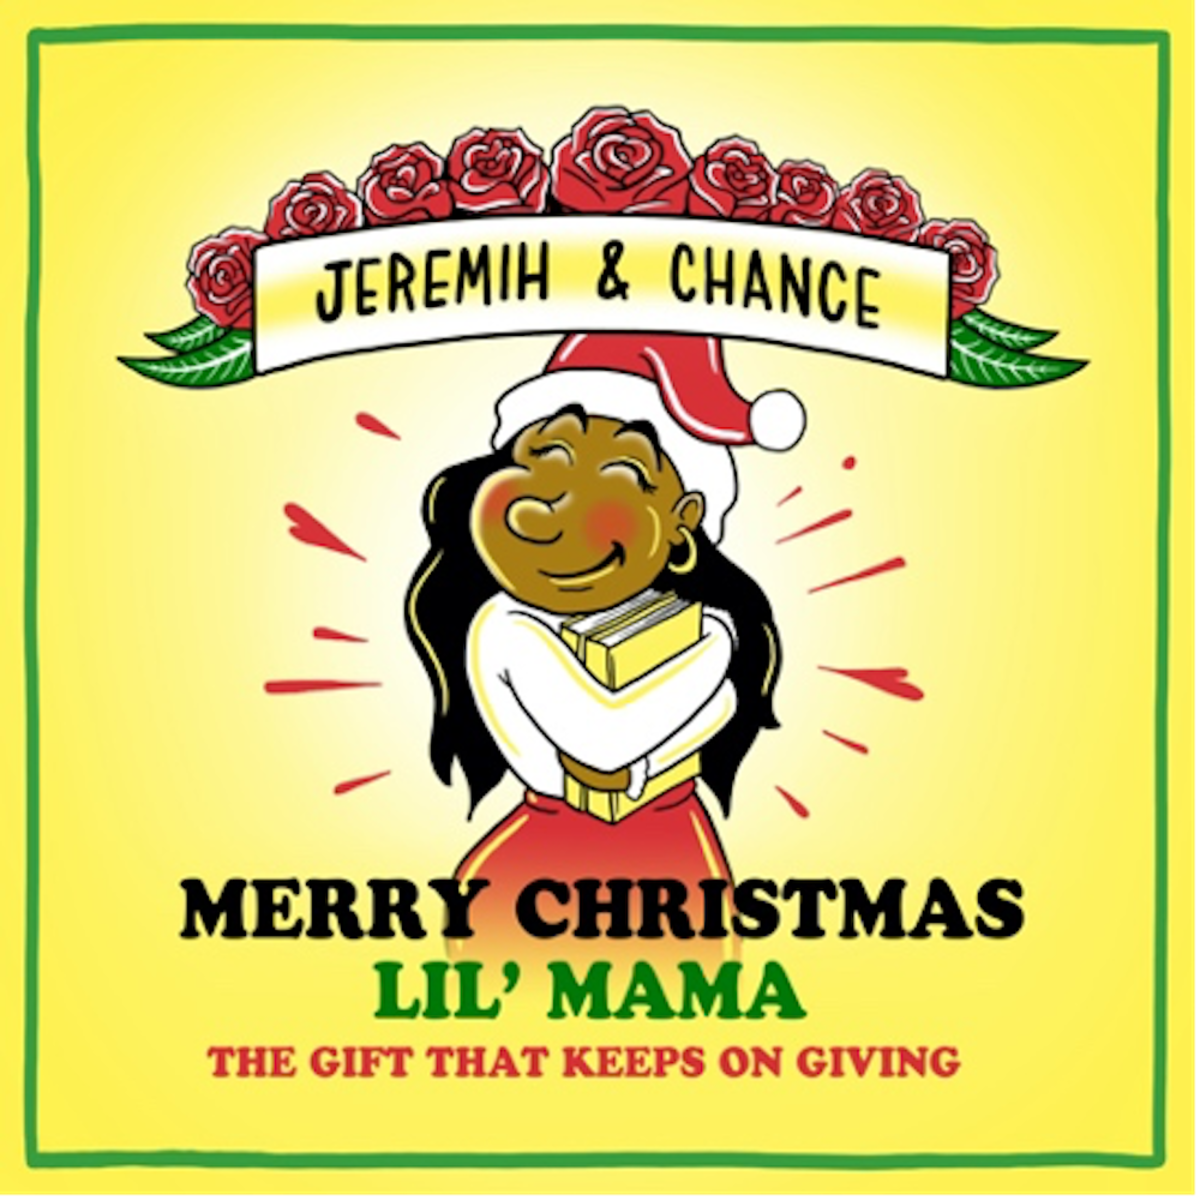 Chance the Rapper & Jeremih’s Christmas Project Now Available on